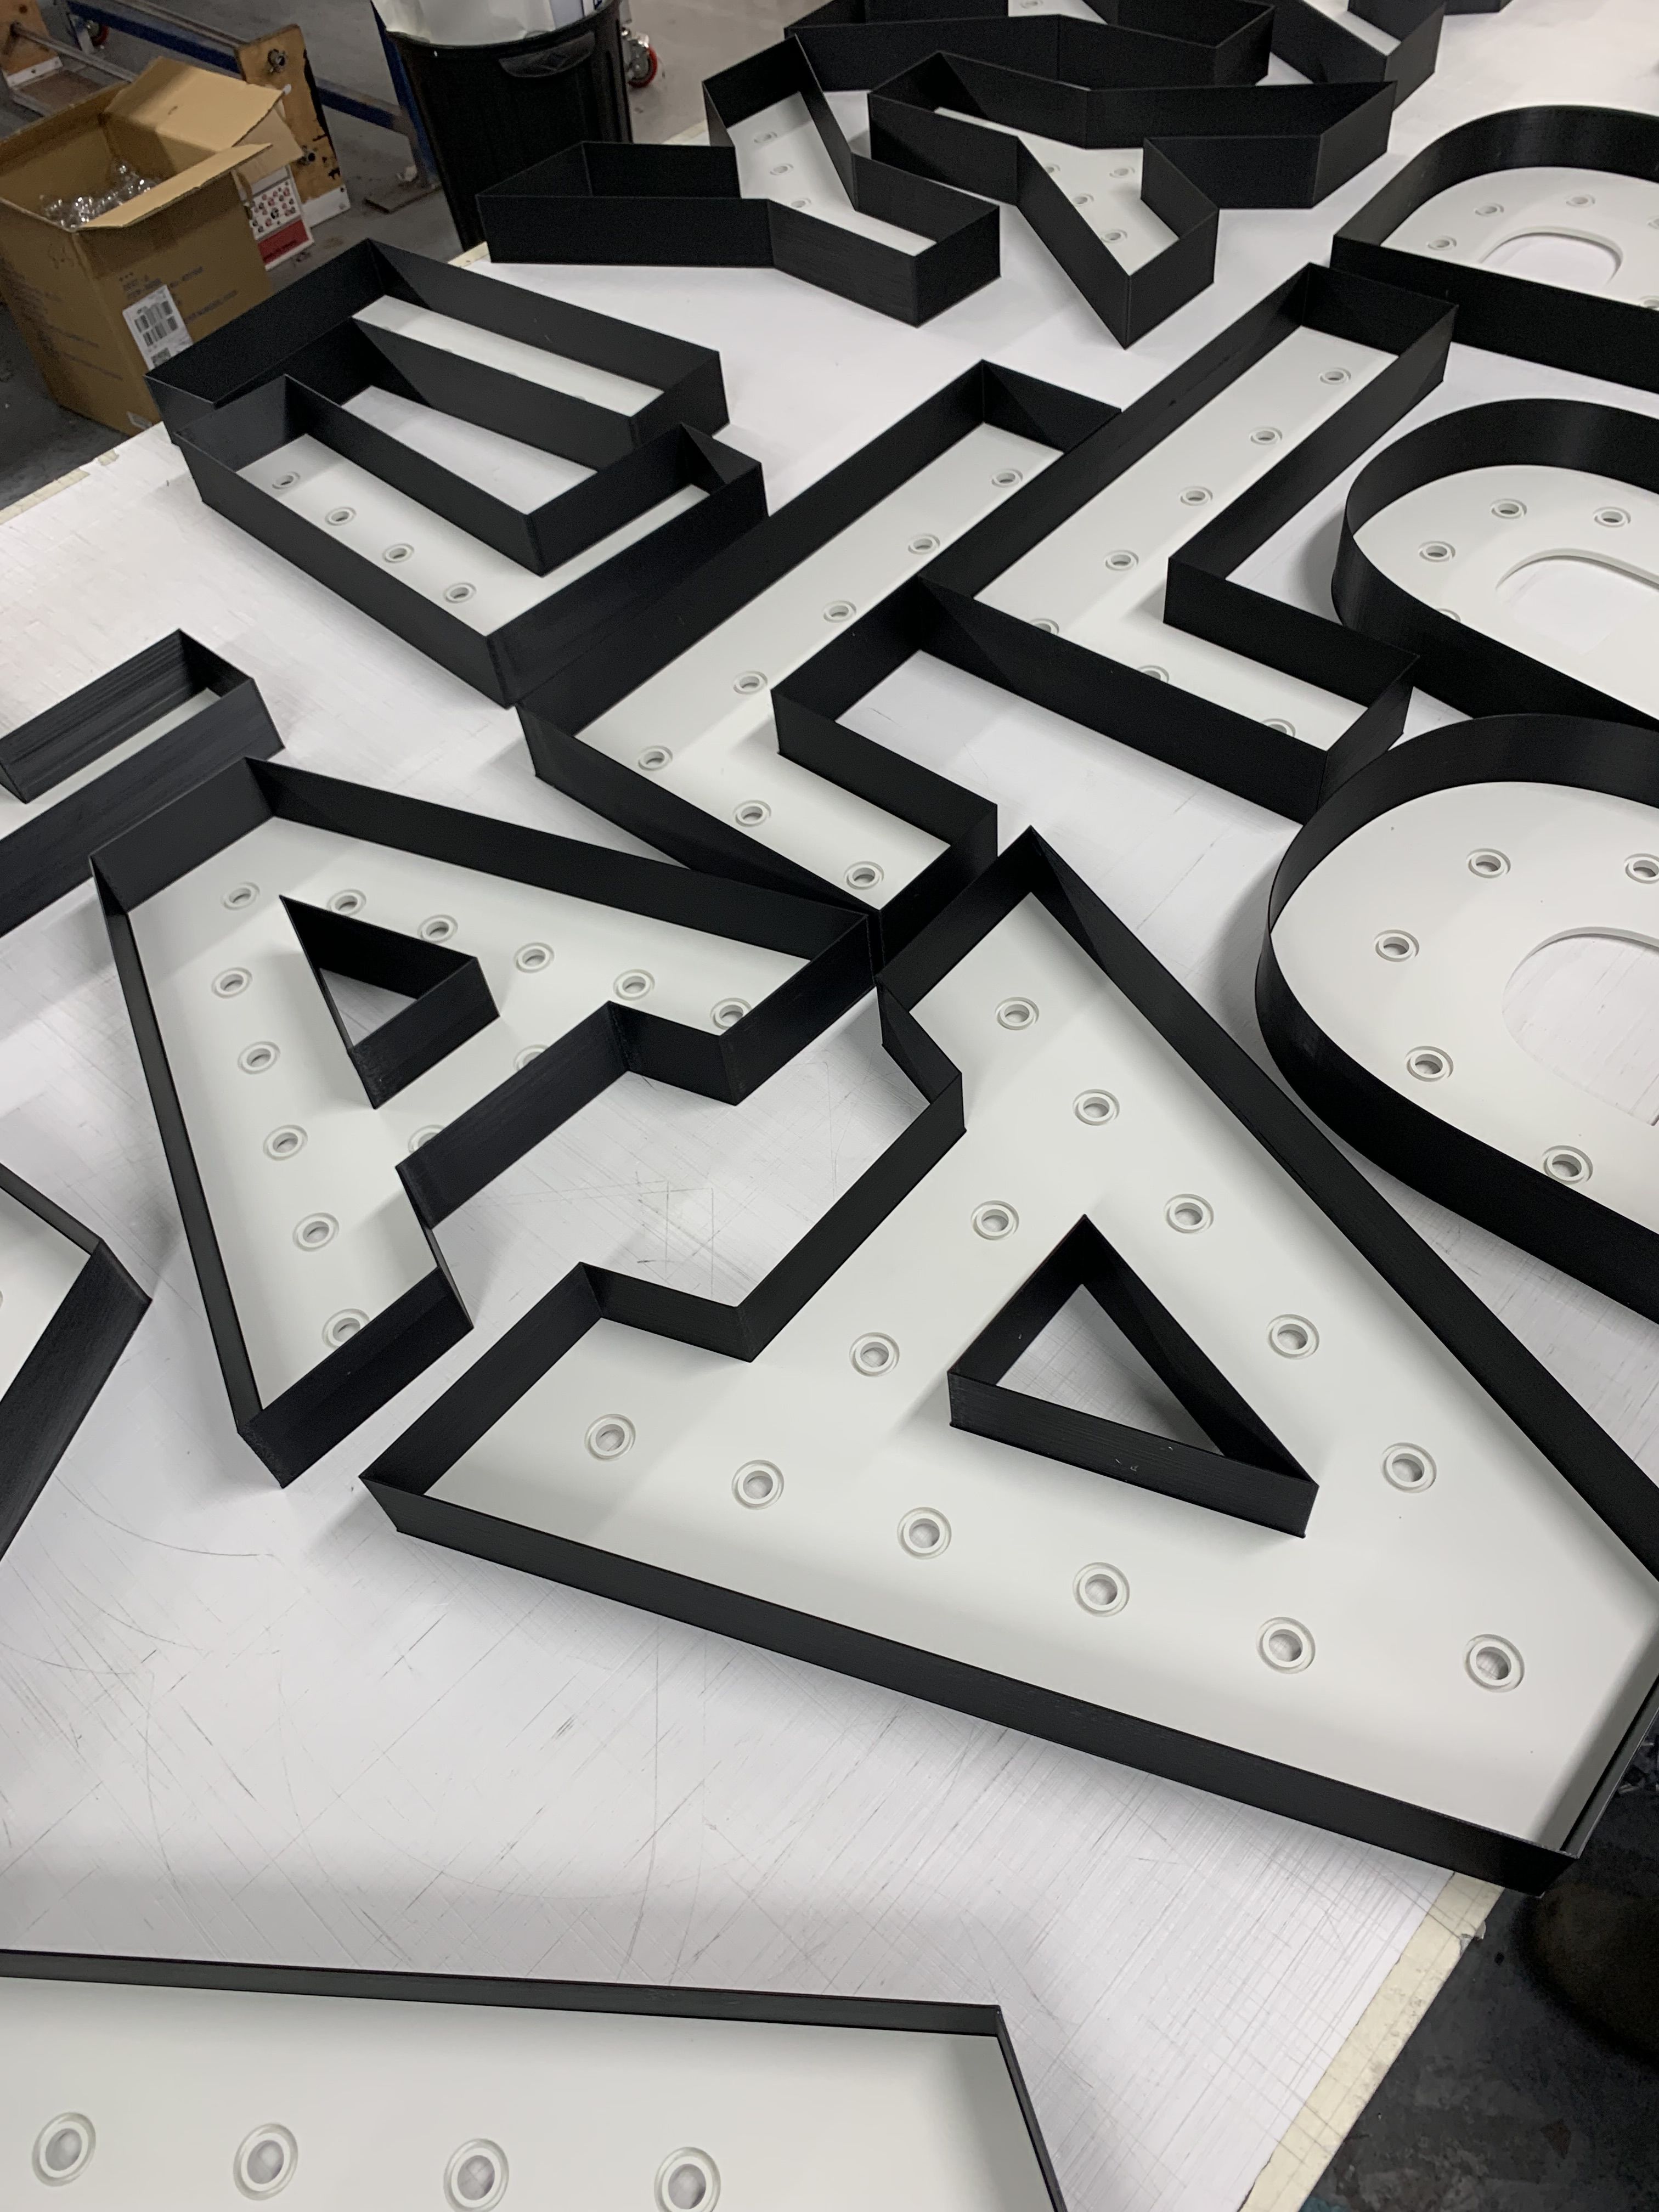 3D Printed Letters